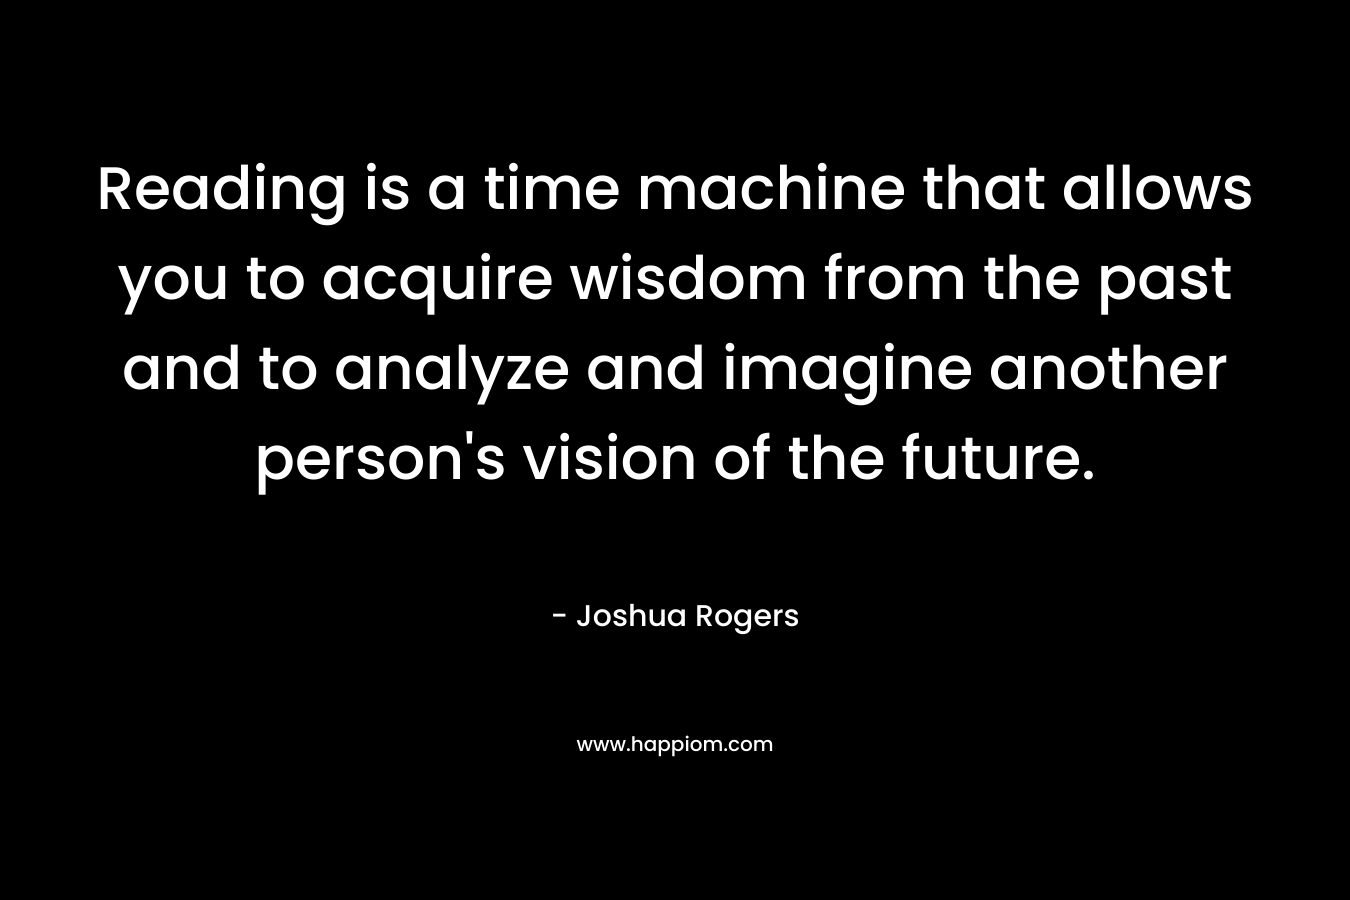 Reading is a time machine that allows you to acquire wisdom from the past and to analyze and imagine another person’s vision of the future. – Joshua Rogers